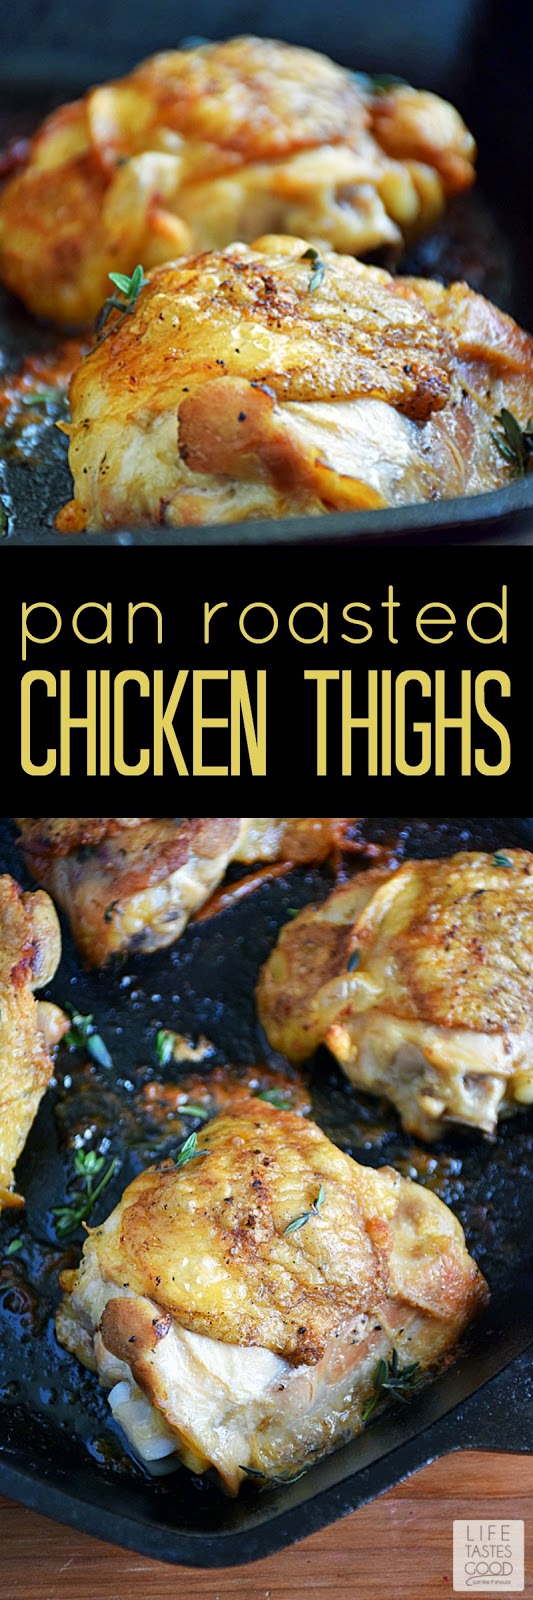 Pan Roasted Chicken Thighs | by Life Tastes Good make a simple dinner for any night of the week, but perfect for company too! They are budget-friendly, taste great, and easy to make! It doesn't get much better than this for an easy dinner!